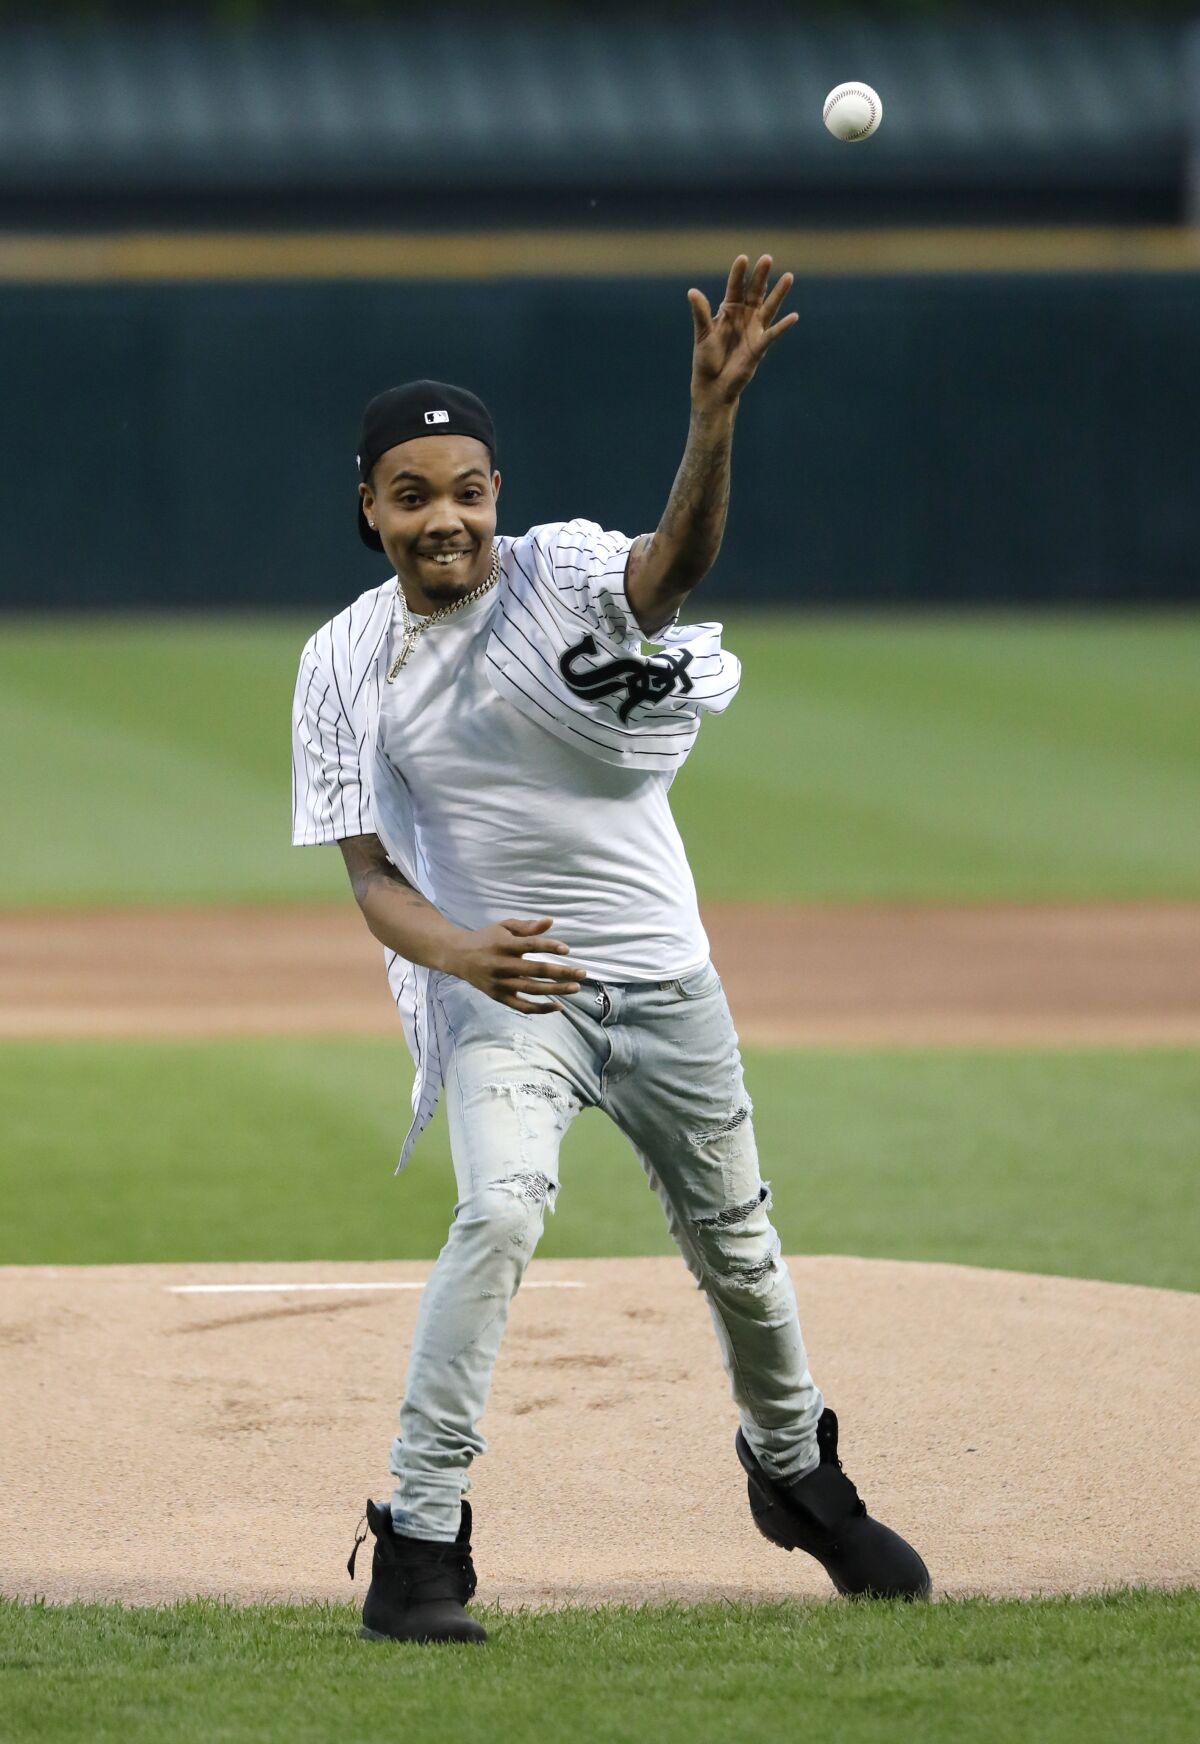 FILE — This June 11, 2019 file photo, Chicago rapper G Herbo throws a ceremonial first pitch before a baseball game between the Chicago White Sox and the Washington Nationals in Chicago. Federal prosecutors announced Wednesday, May 5, 2019 that the Chicago native, whose real name is Herbert Wright III, was charged with lying to federal investigators. In December, the 25-year-old G Herbo was among six people, including his promoter, indicted for conspiracy to commit wire fraud and aggravated identity theft. (AP Photo/Charles Rex Arbogast, File)